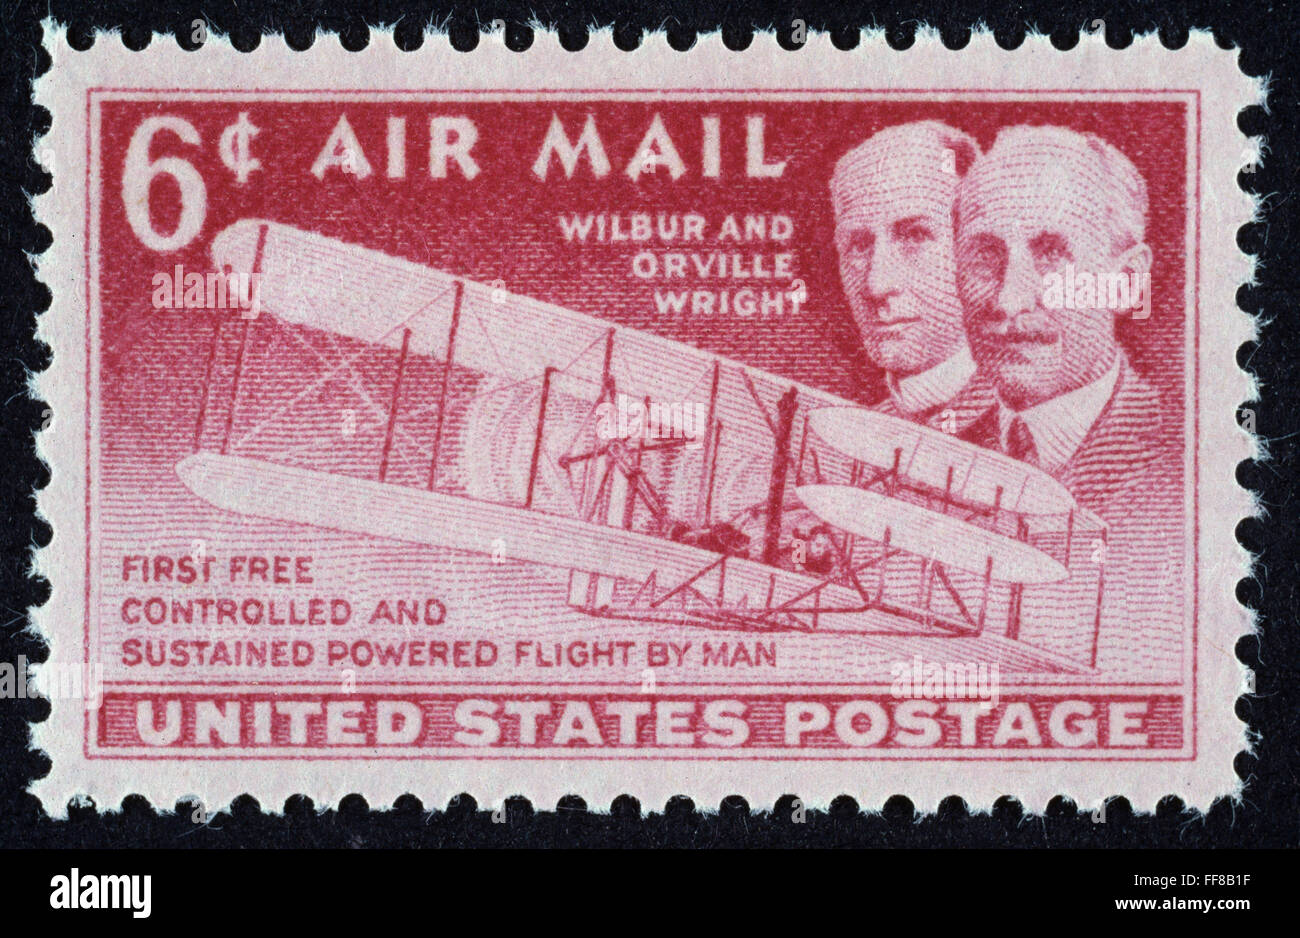 WRIGHT BROTHERS. /nWilbur (1867-1912) and Orville Wright (1871-1948). American pioneers in aviation. The Wright Brothers and their first flight (1903) commemorated on a U.S. postage stamp, 1949. Stock Photo